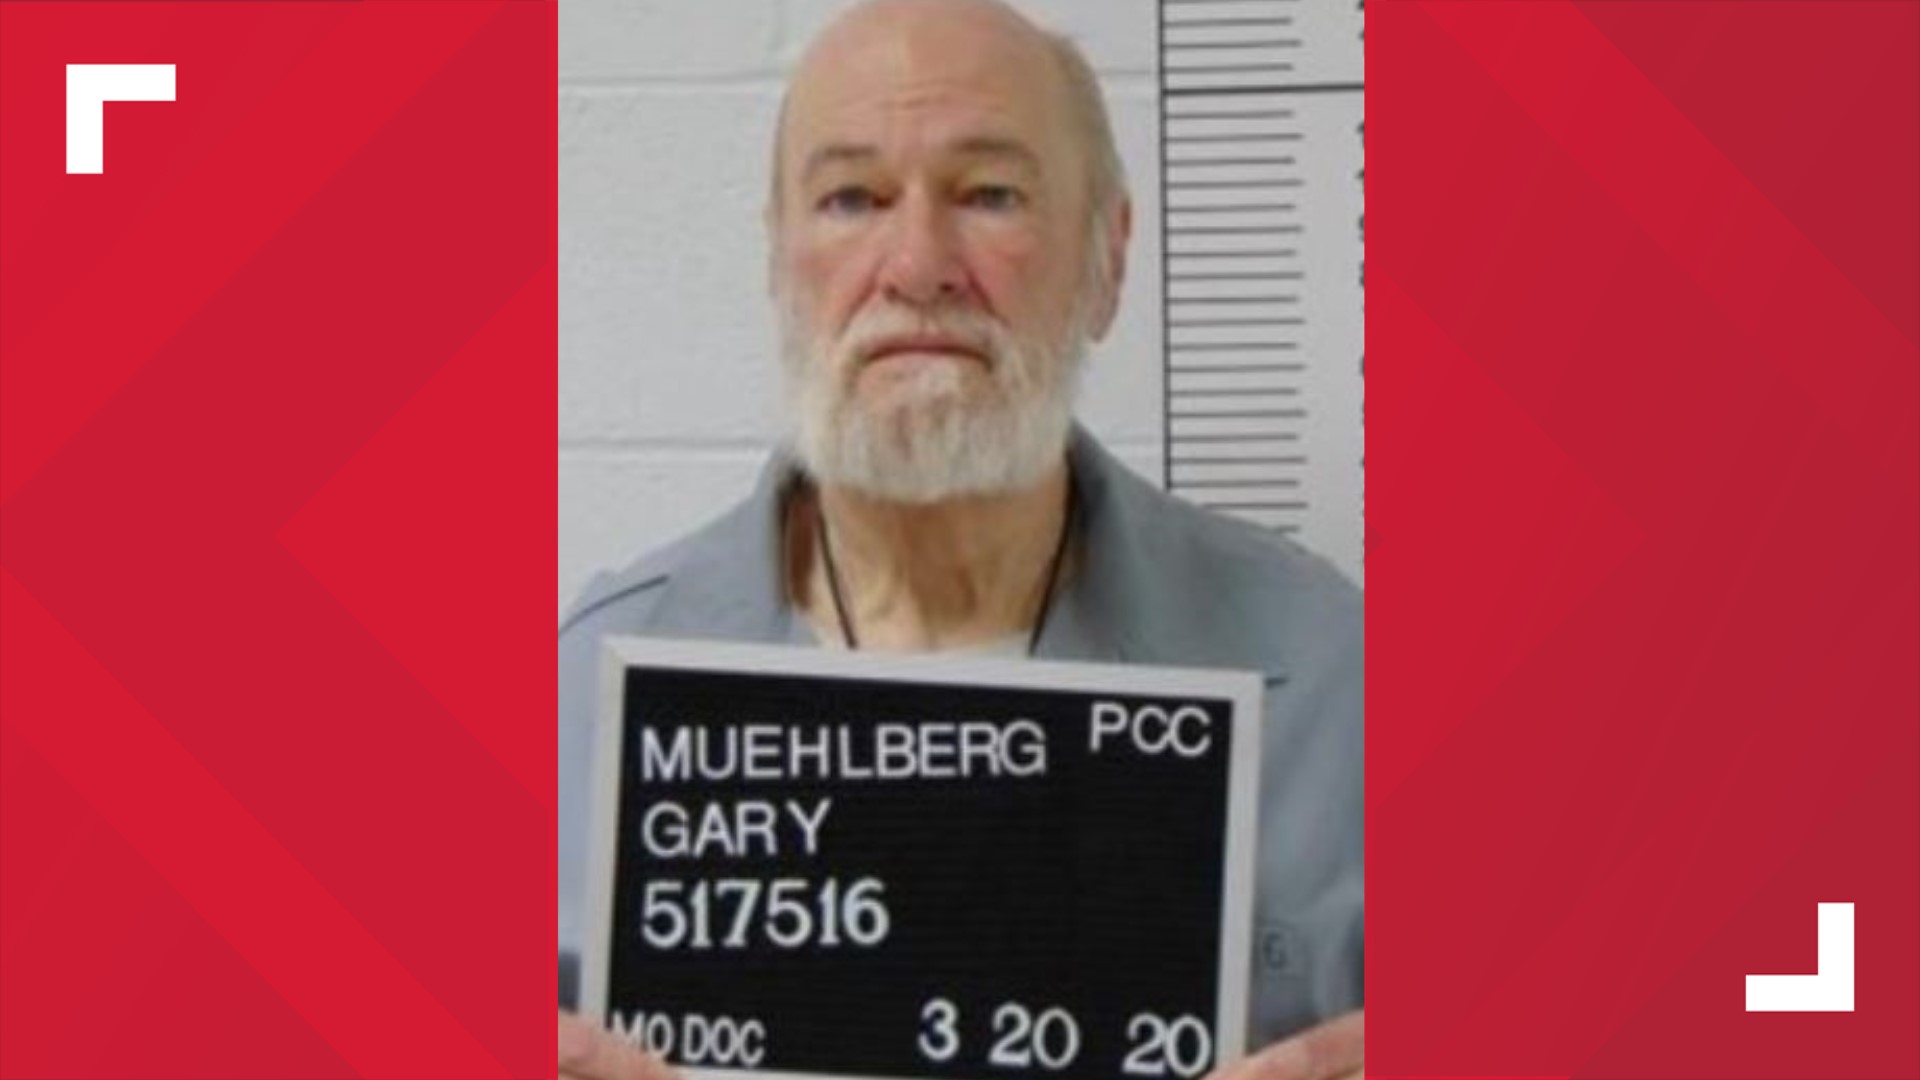 Gary Muehlberg has confessed to killing five women during the early 1990s. The fifth victim remains a mystery.